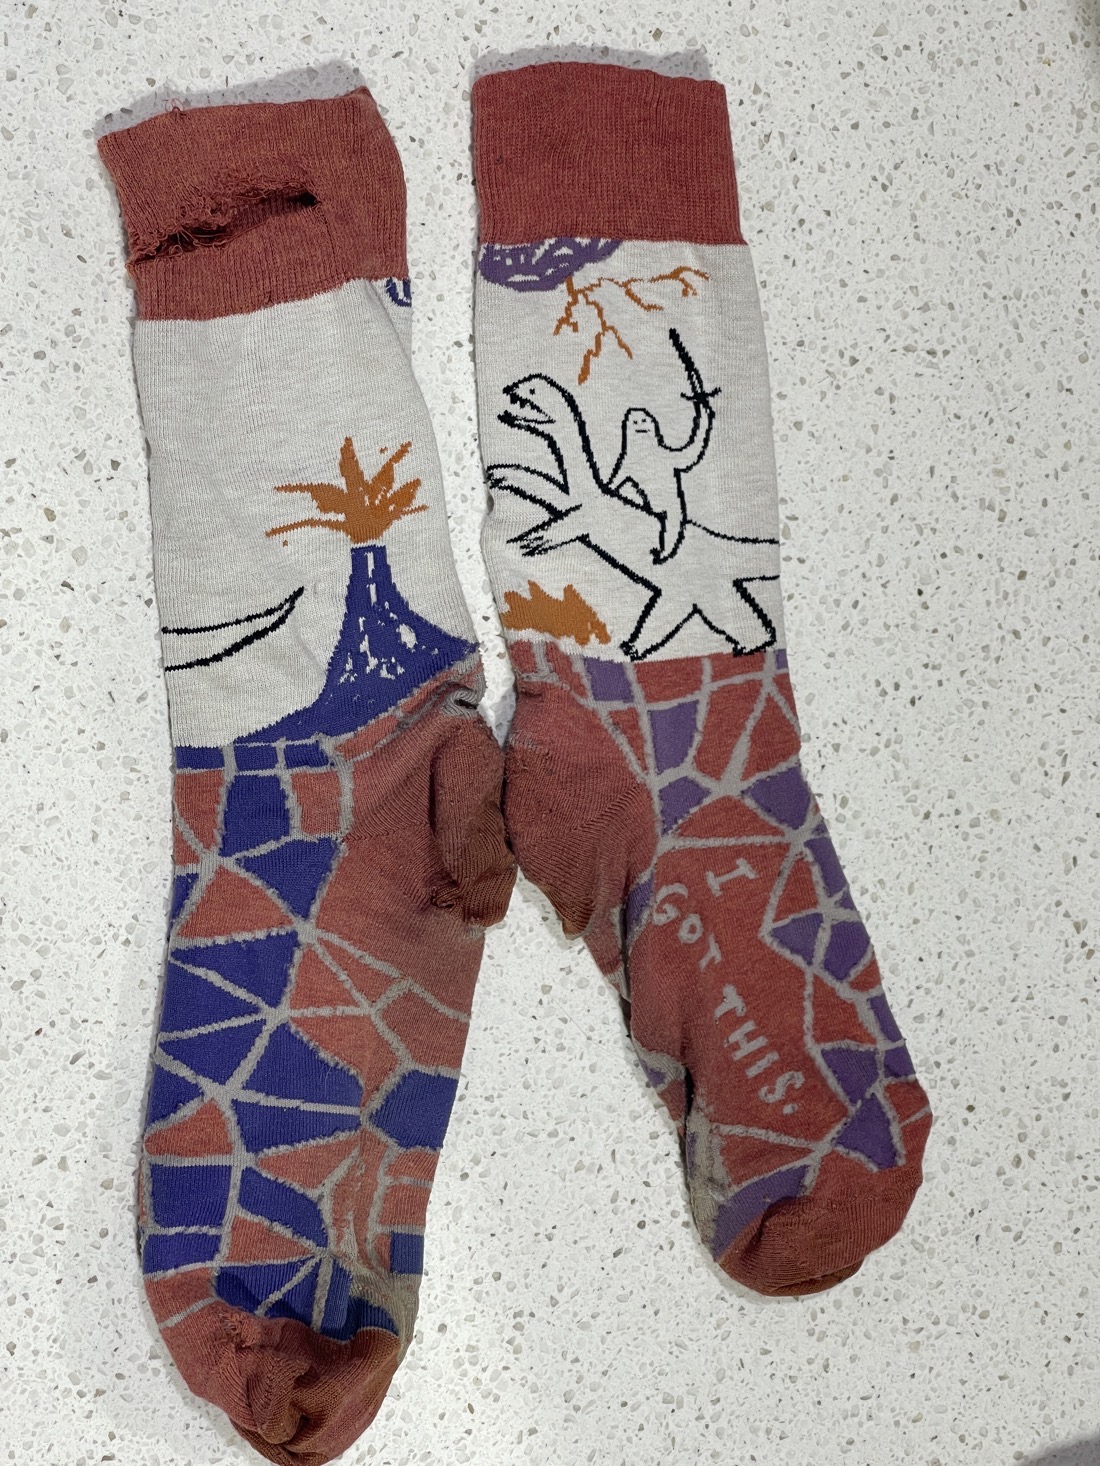 A picture of a pair of worn-out socks, with a picture of a sword-weilding blob riding a dinosaur